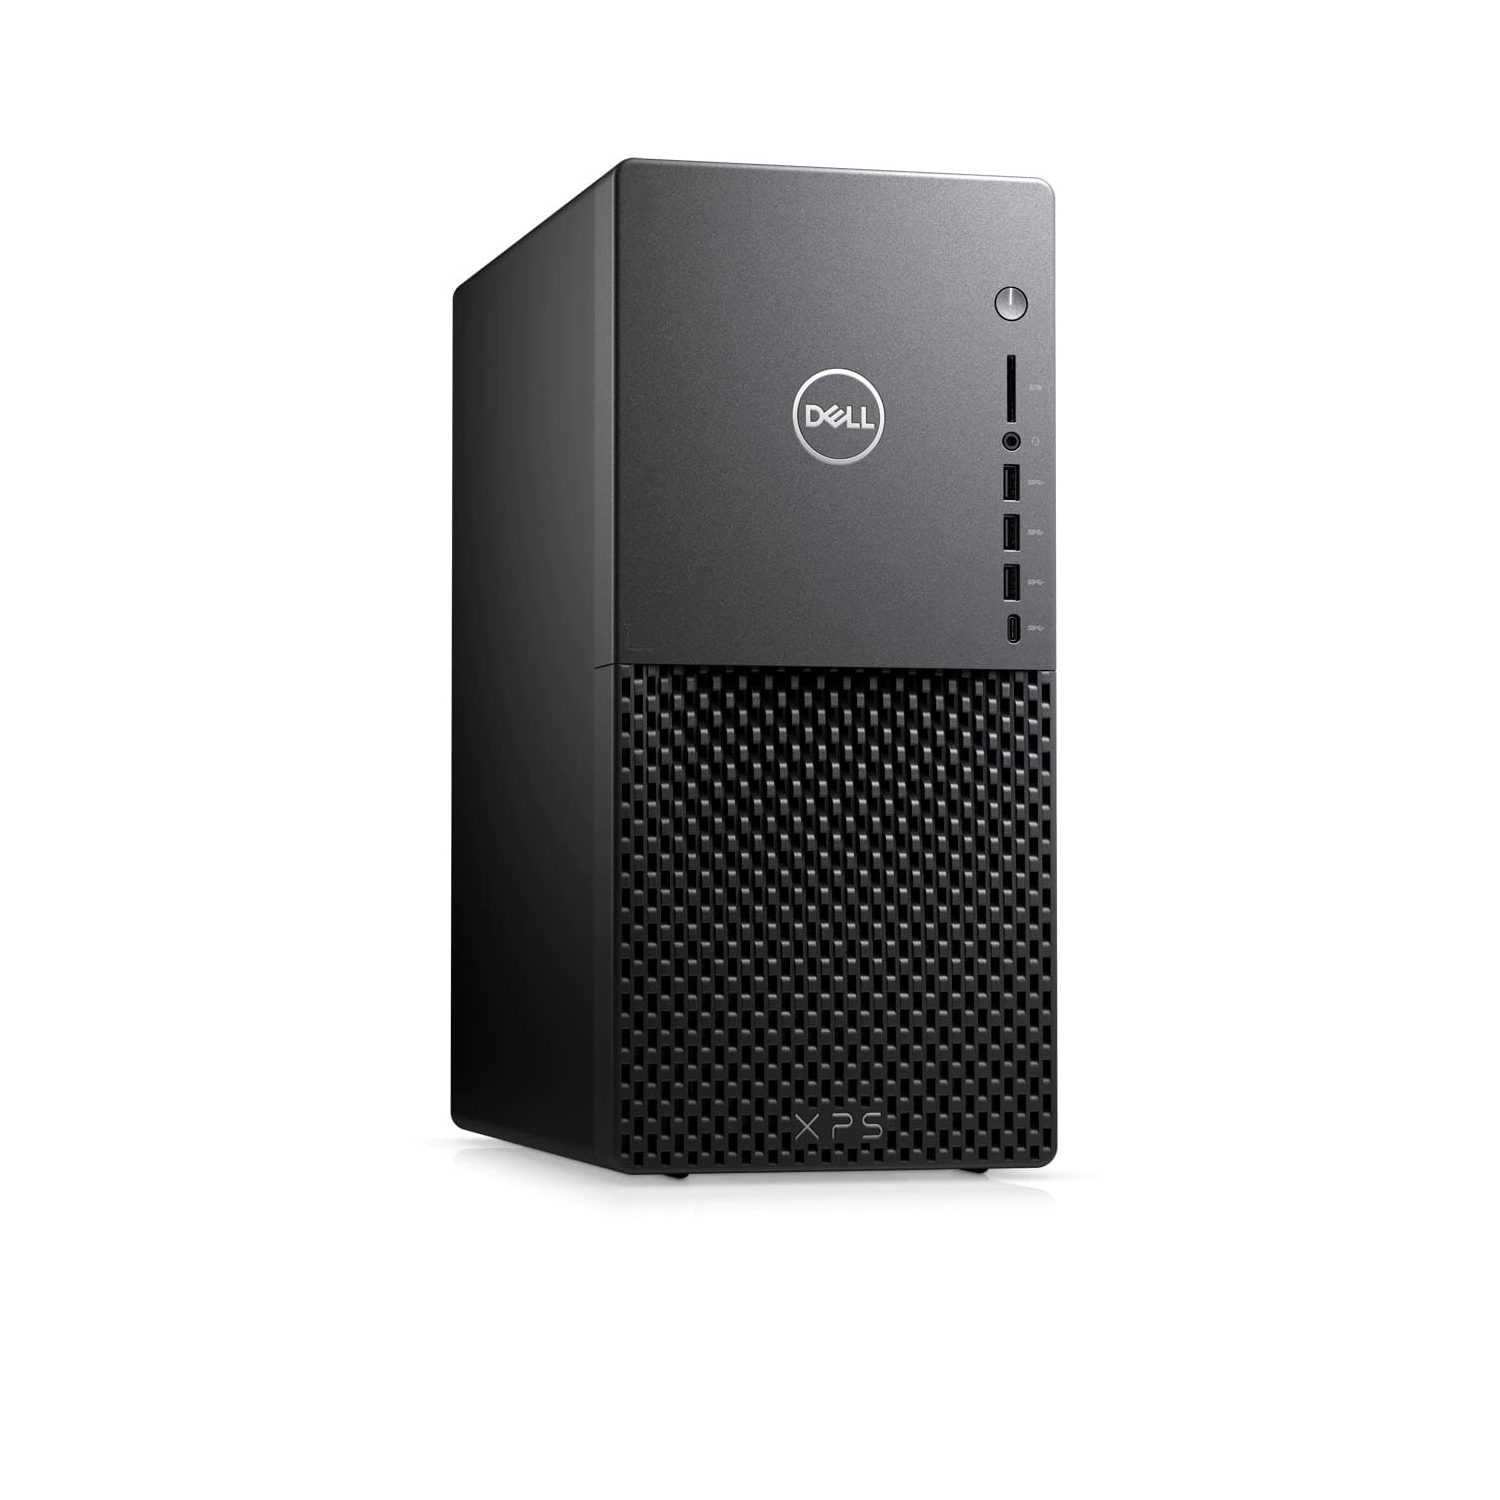 Refurbished (Excellent) - Dell XPS 8940 Desktop (2020) | Core i7 - 1TB HDD + 512GB SSD - 16GB RAM - GT 1030 | 8 Cores @ 4.9 GHz - 11th Gen CPU Certified Refurbished